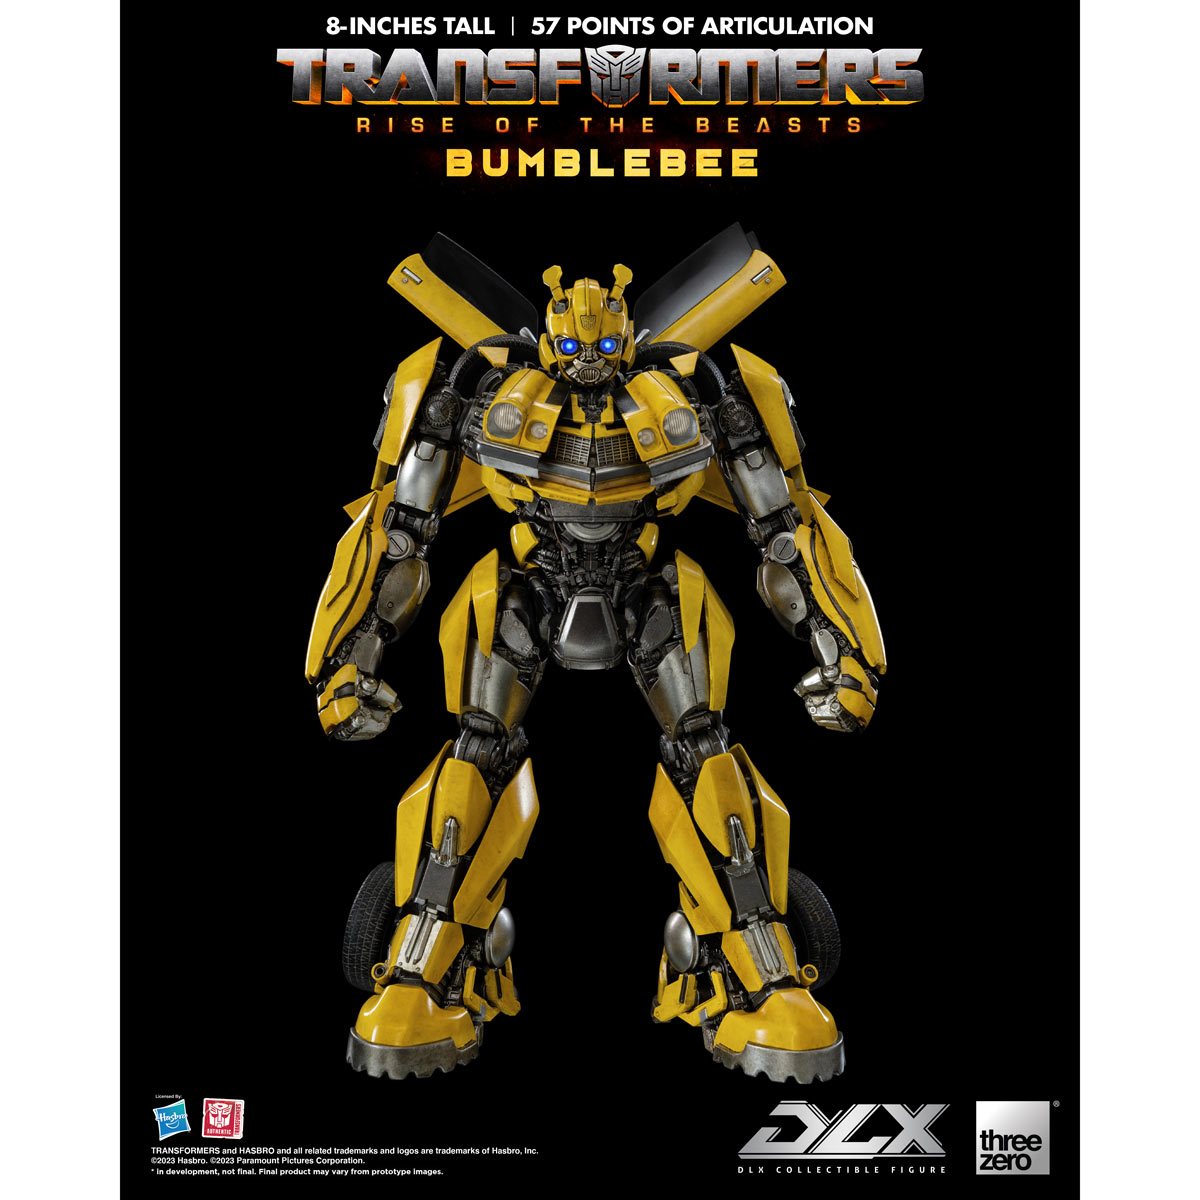 Bumblebee DLX Scale Collectible Figure | Transformers: Rise Of The Beasts |  threezero